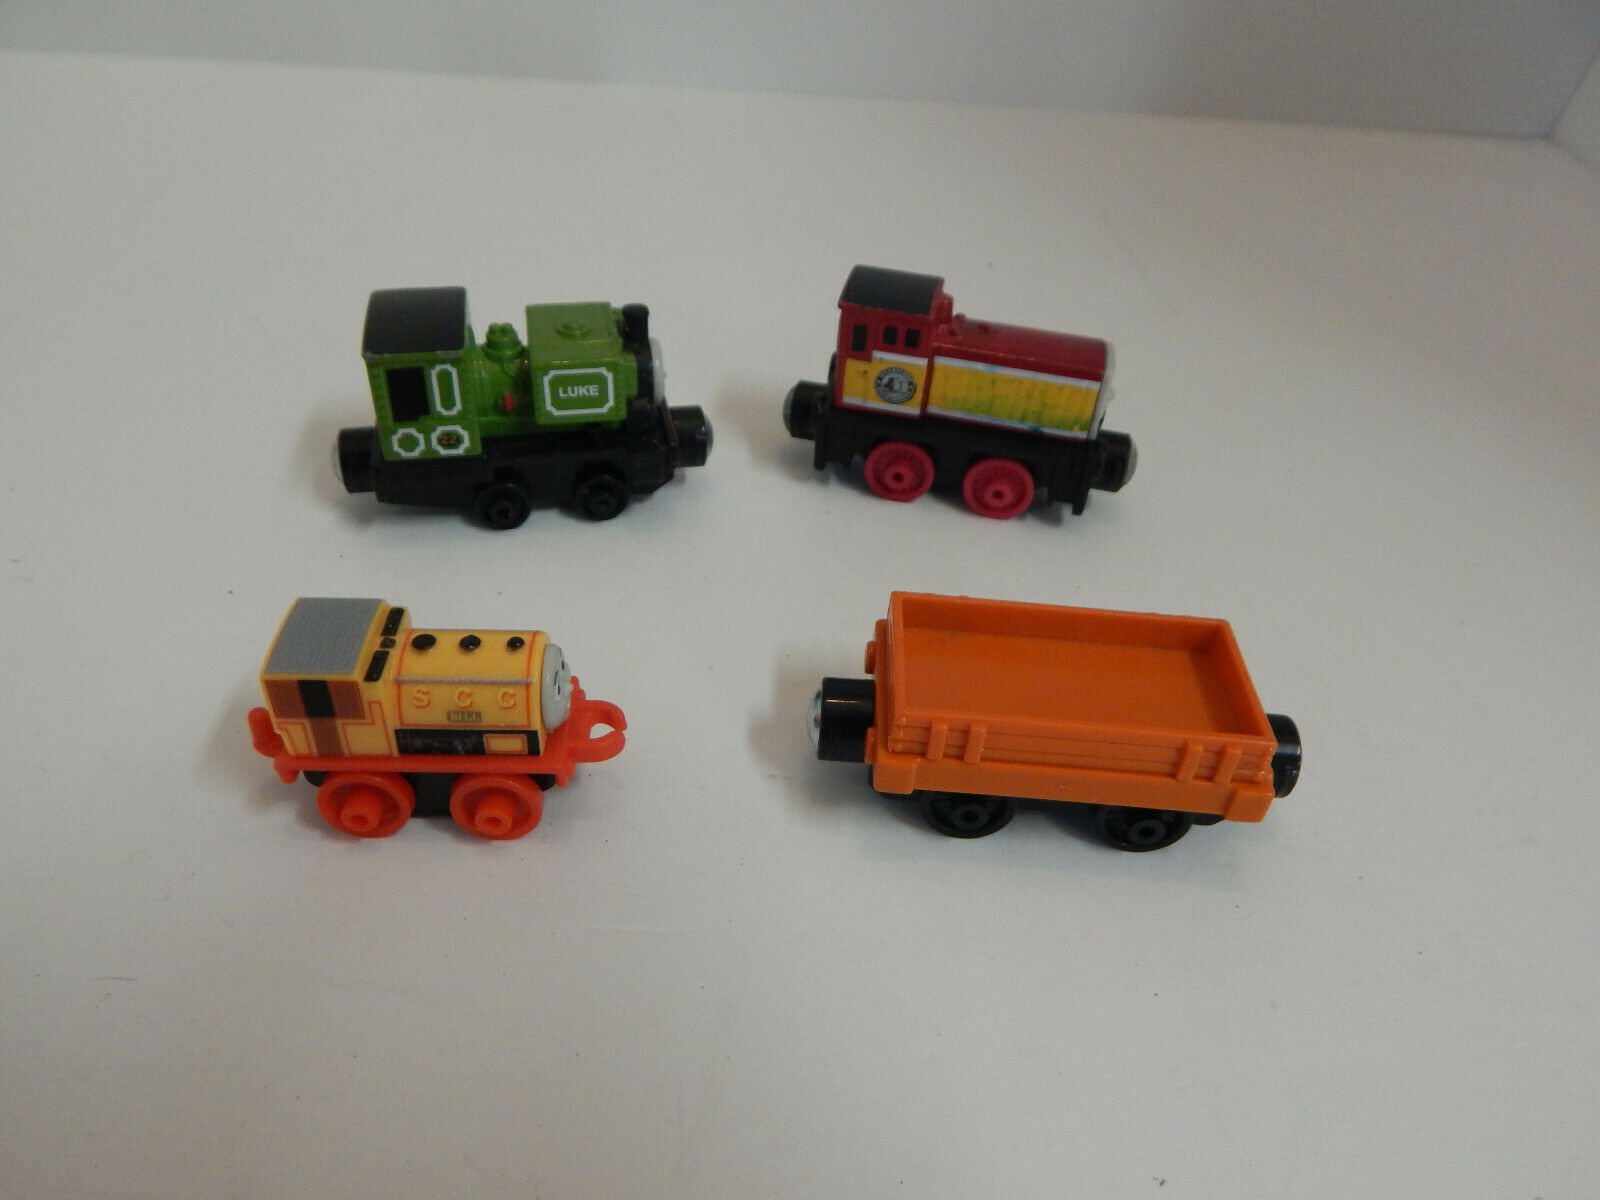 Primary image for Mattel Gullane Thomas the Train Limited Train Cars mixed Lot of 4